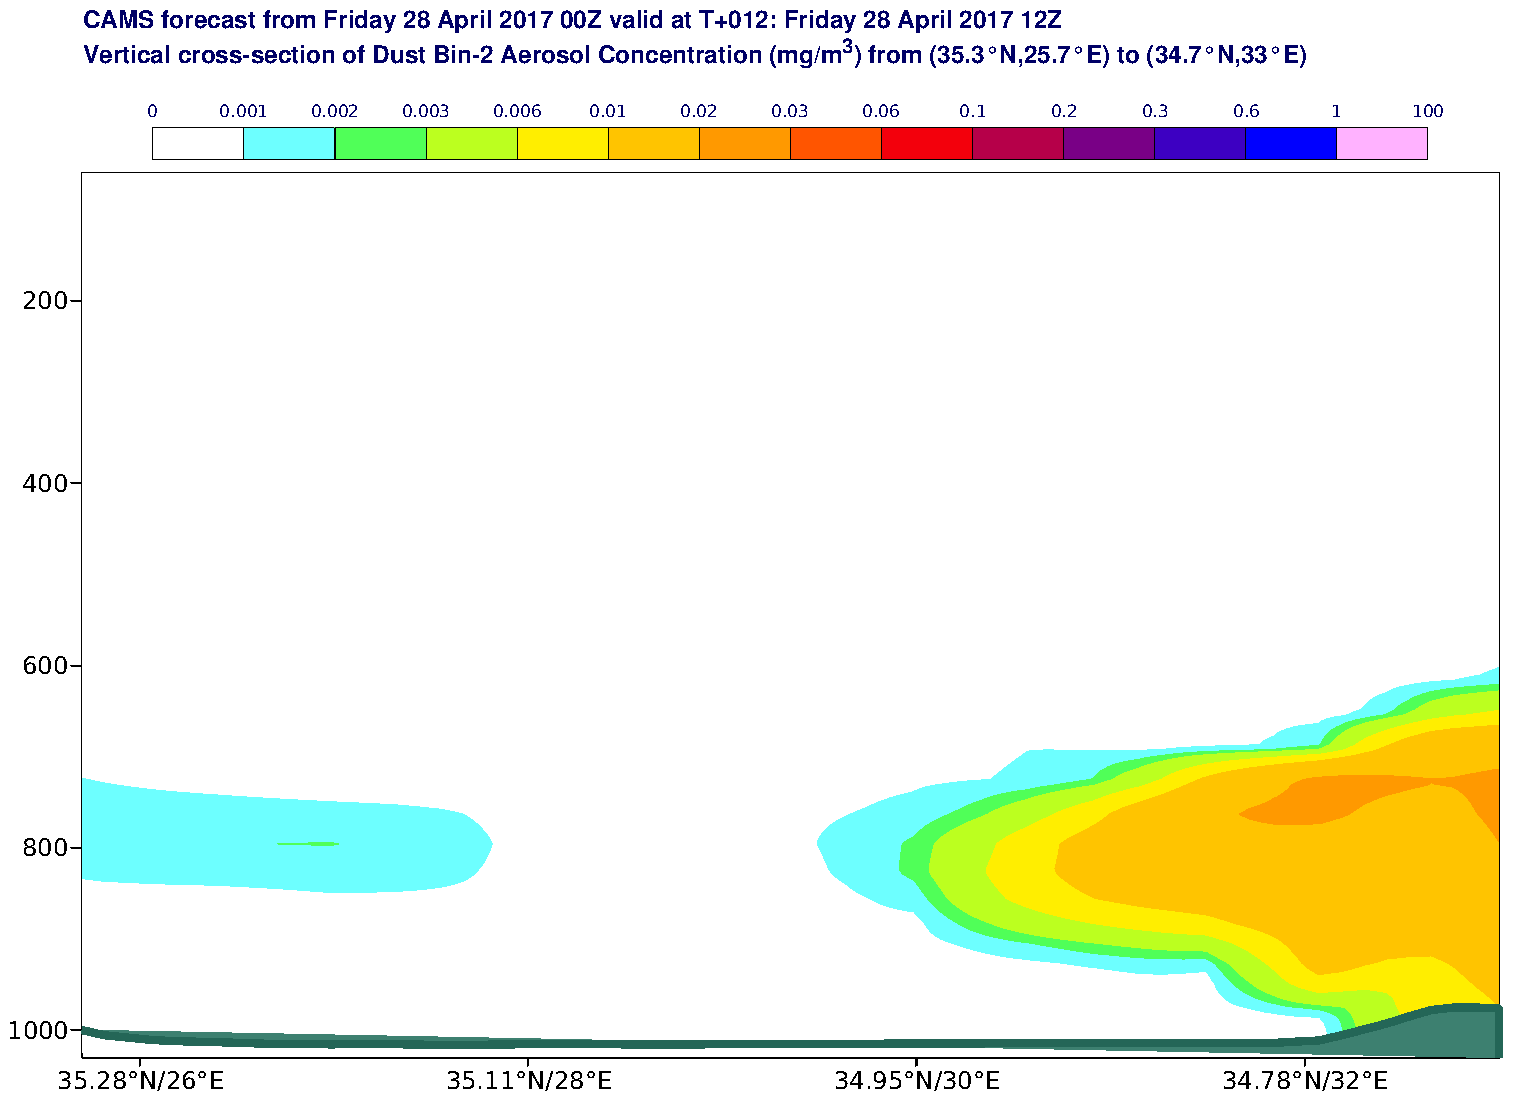 Vertical cross-section of Dust Bin-2 Aerosol Concentration (mg/m3) valid at T12 - 2017-04-28 12:00